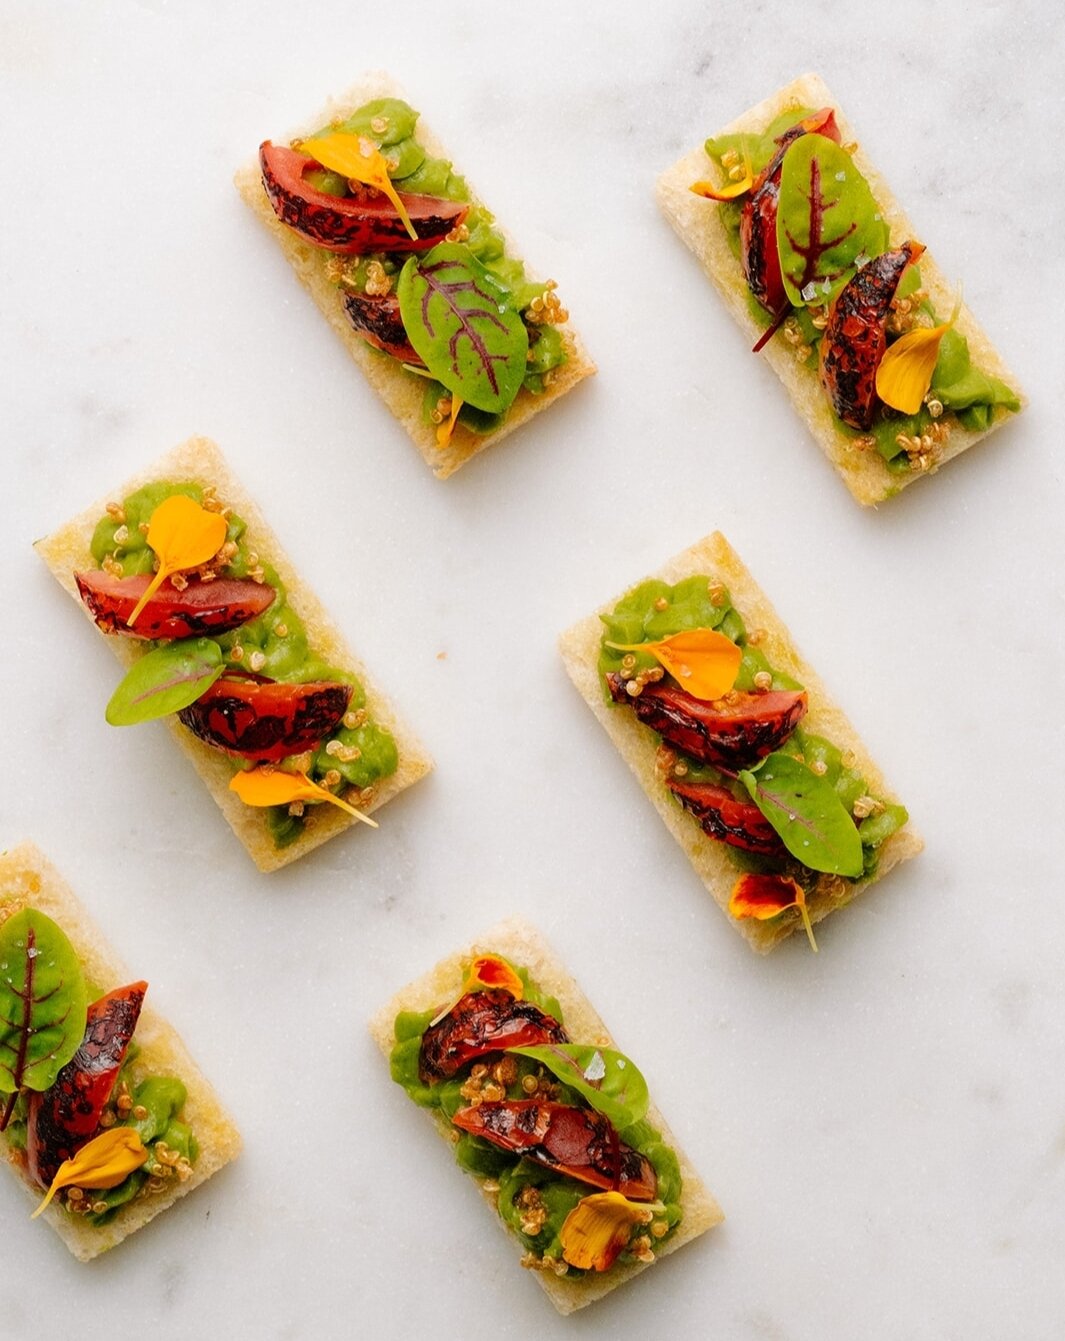 It's not just for the hipsters! Our Avocado Toast appetizer is for everyone (including vegans). Always a popular choice with Edge weddings and events!
..
Connect with our events team to start planning your next Edge event!
events@edgecatering.ca